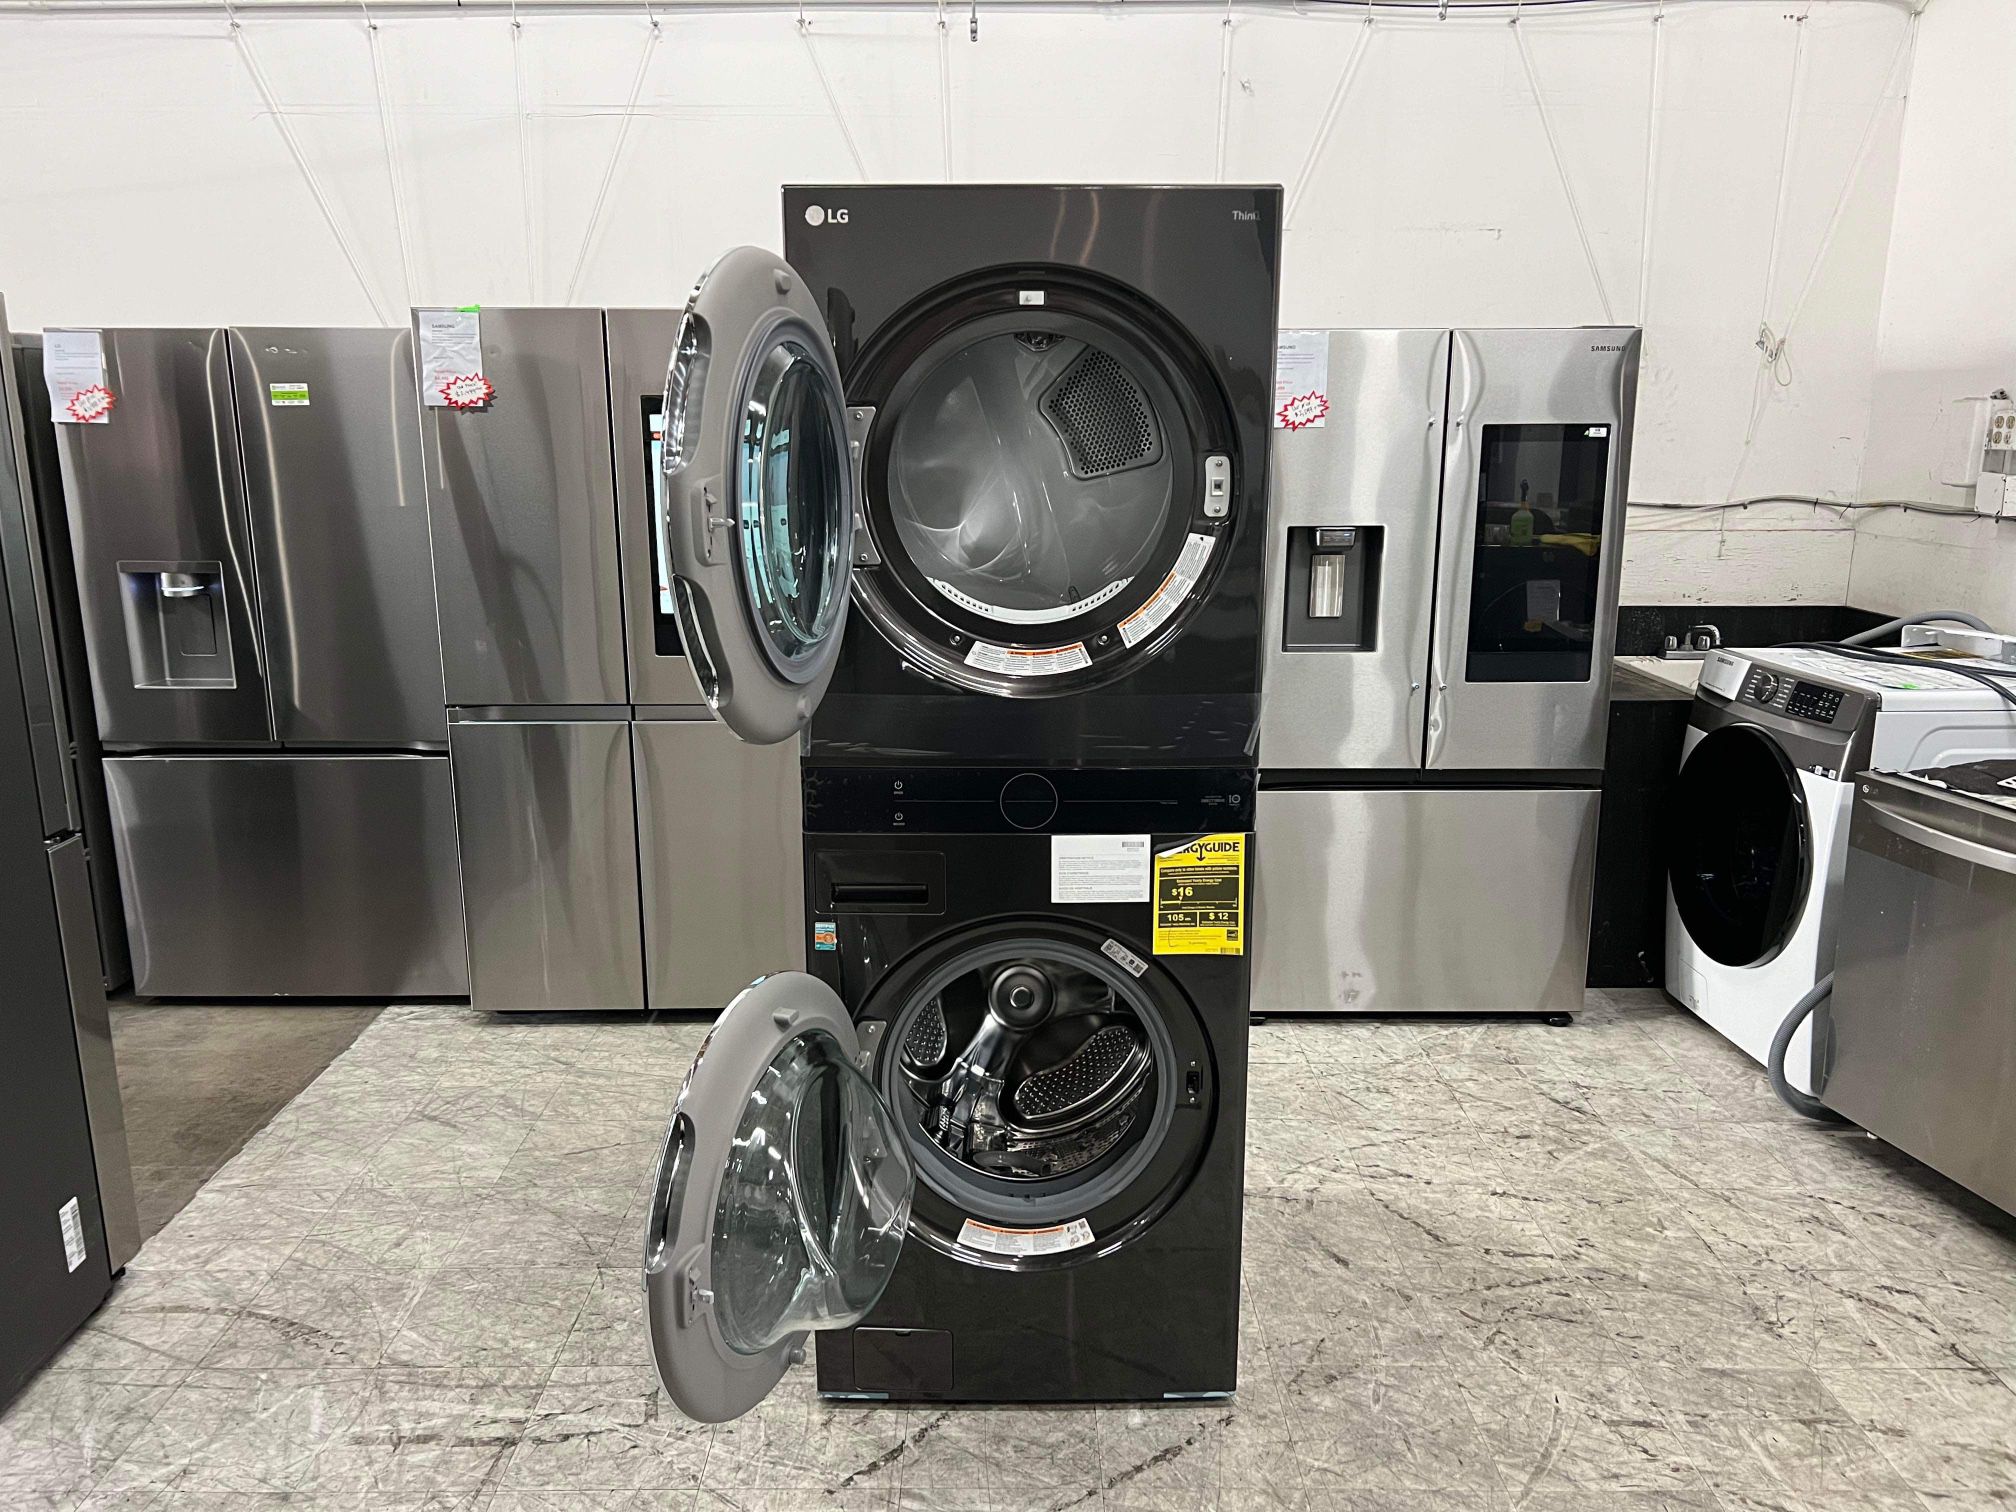 LG 4.5 cuft washtower laundry center washer and dryer in gas